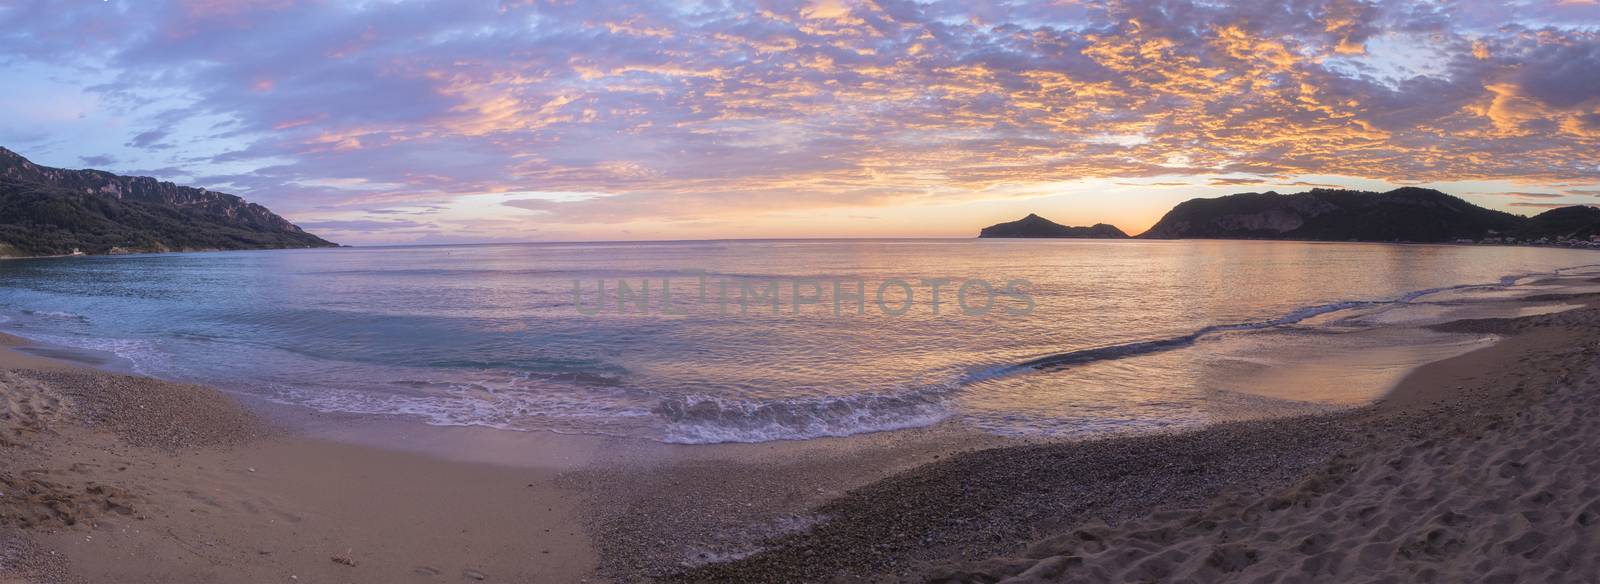 Panoramic view on beautiful pastel pink orange and golden sunset clouds and waves at sea shore Agios Georgios Pagon beach at Corfu island, Greece.